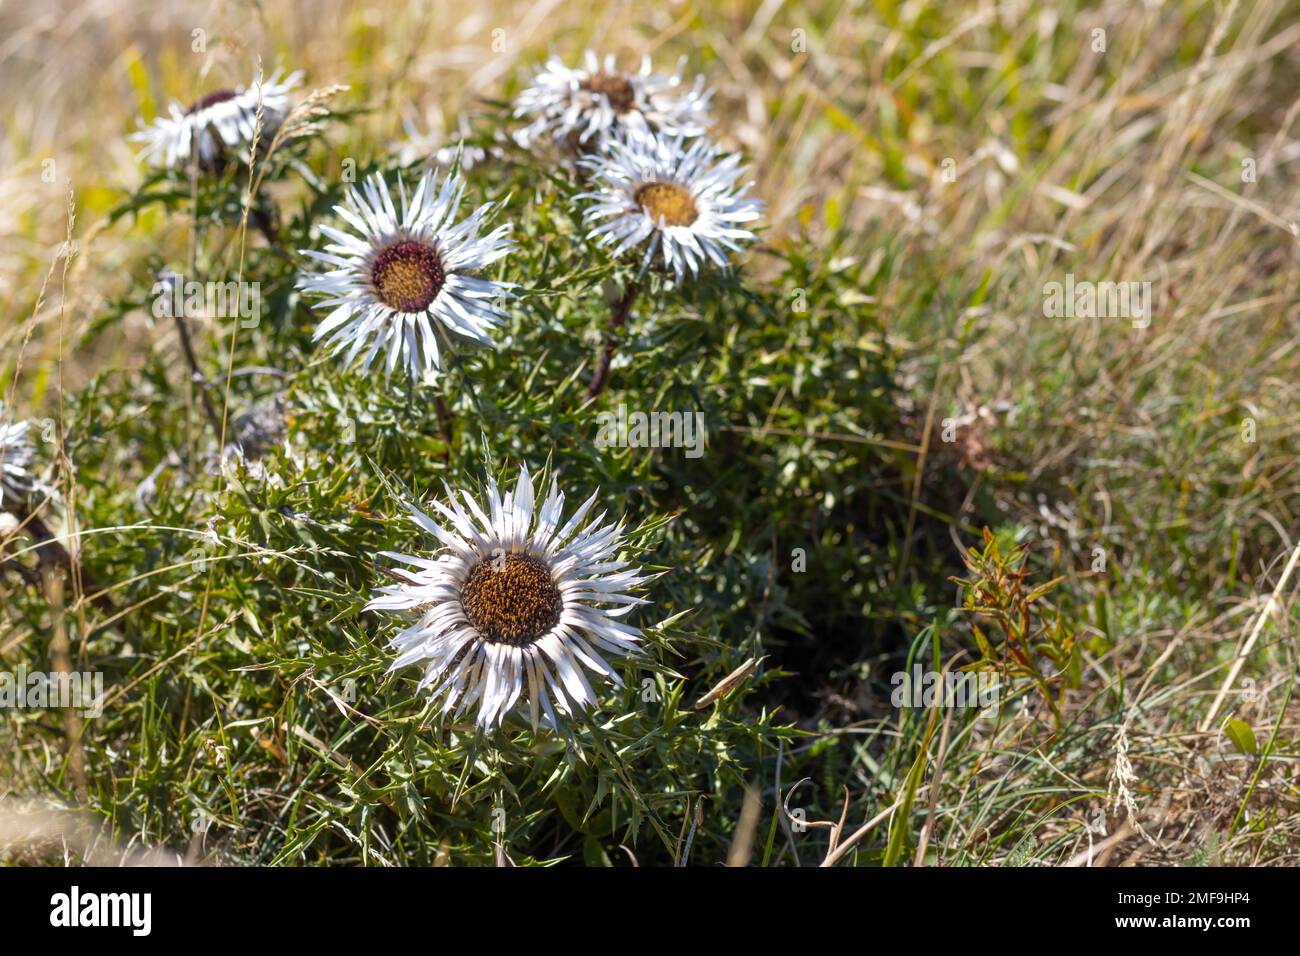 Carlina acaulis, carline thistle, silver thistle, endemic flower plant, Asteraceae family, Parma Italy Stock Photo